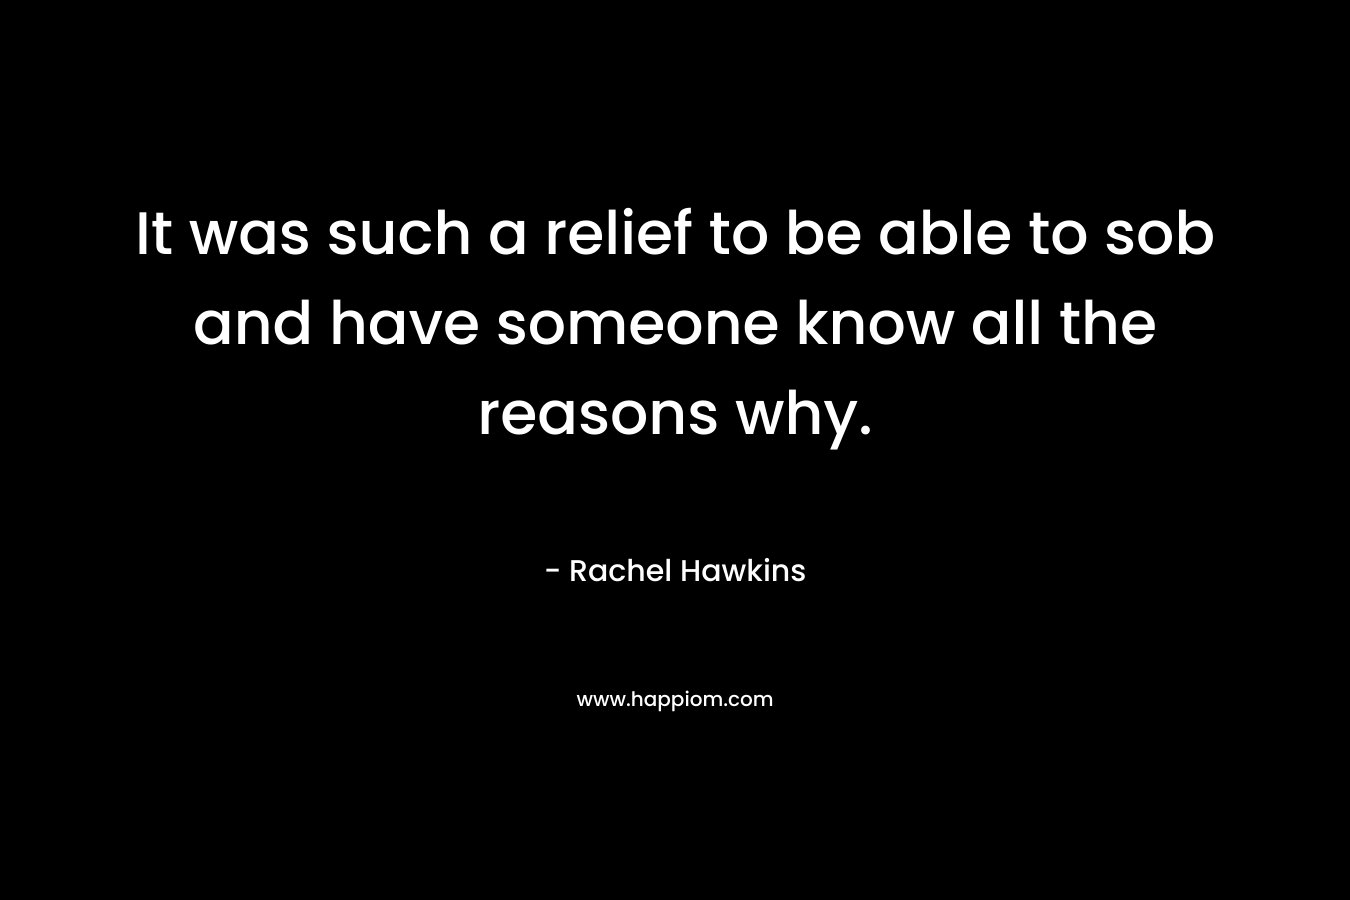 It was such a relief to be able to sob and have someone know all the reasons why. – Rachel Hawkins